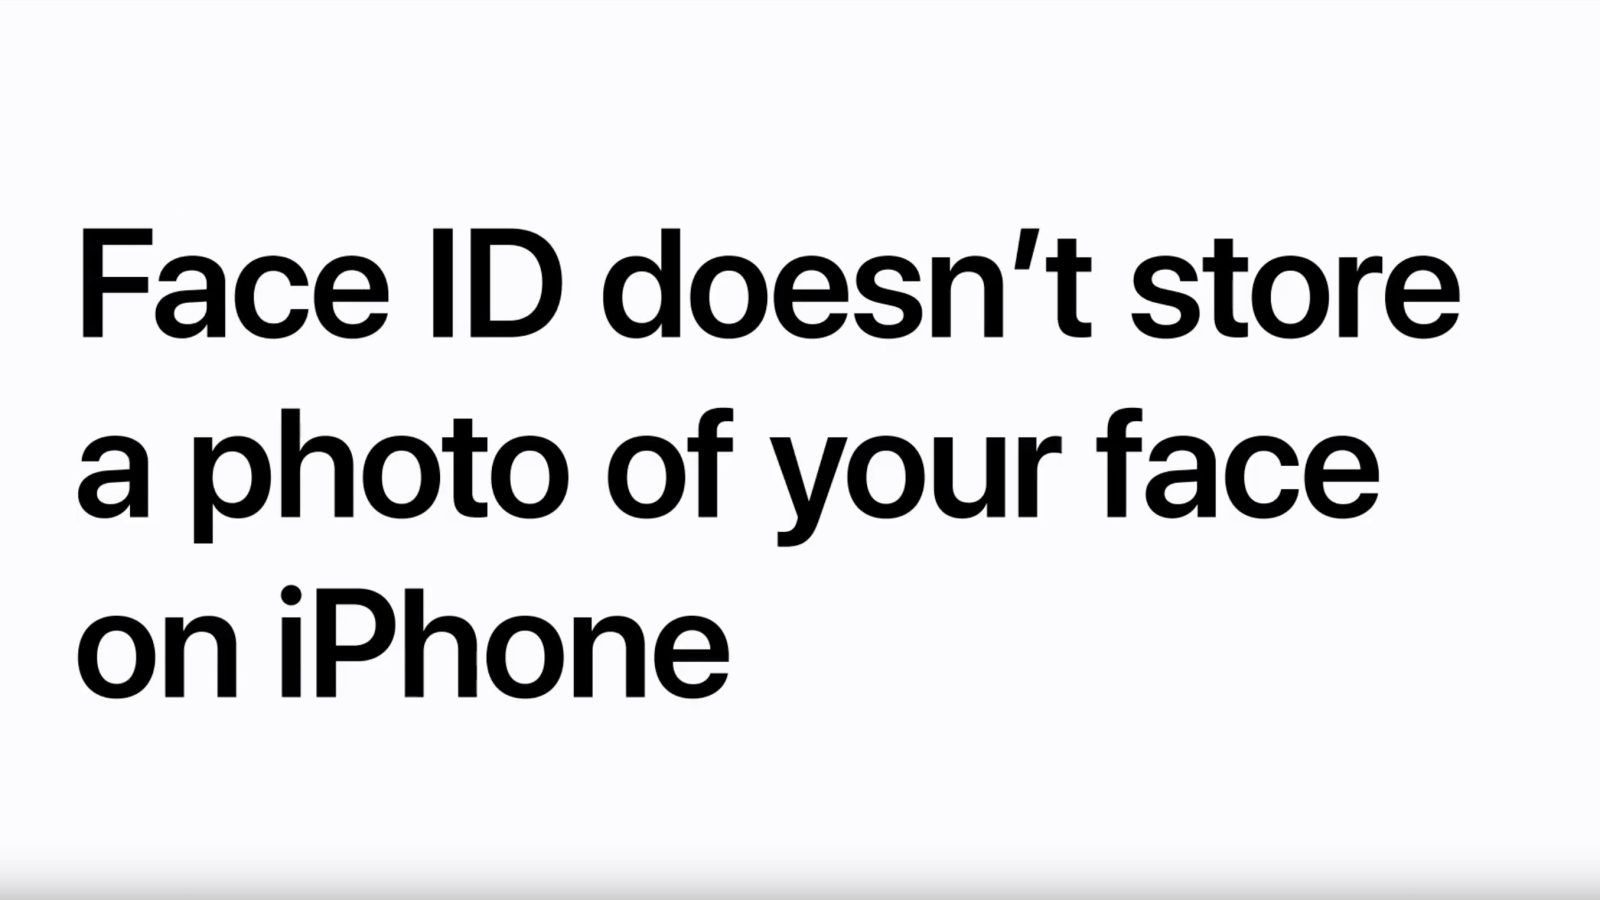 photo of Apple shares new ‘There’s more to iPhone’ videos highlighting iOS 12, Face ID, more image